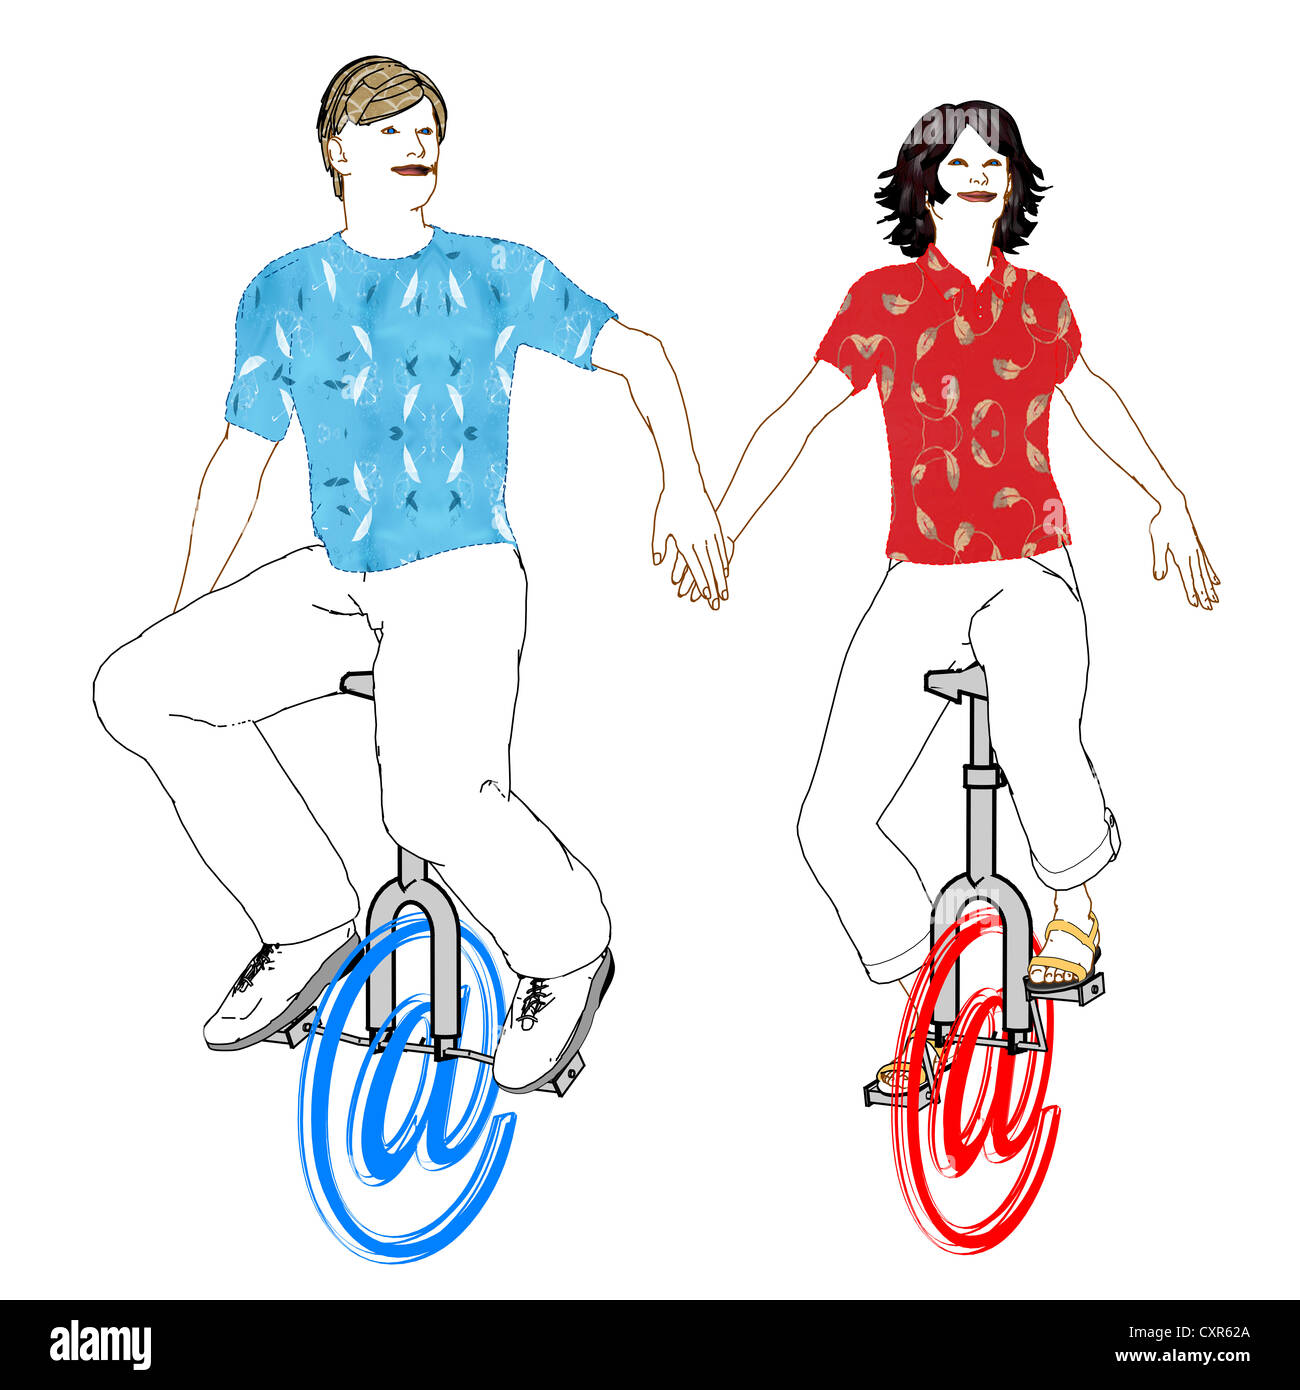 Man and woman riding on unicyles made of 'at' symbols, symbolic image for internet friendship, illustration Stock Photo